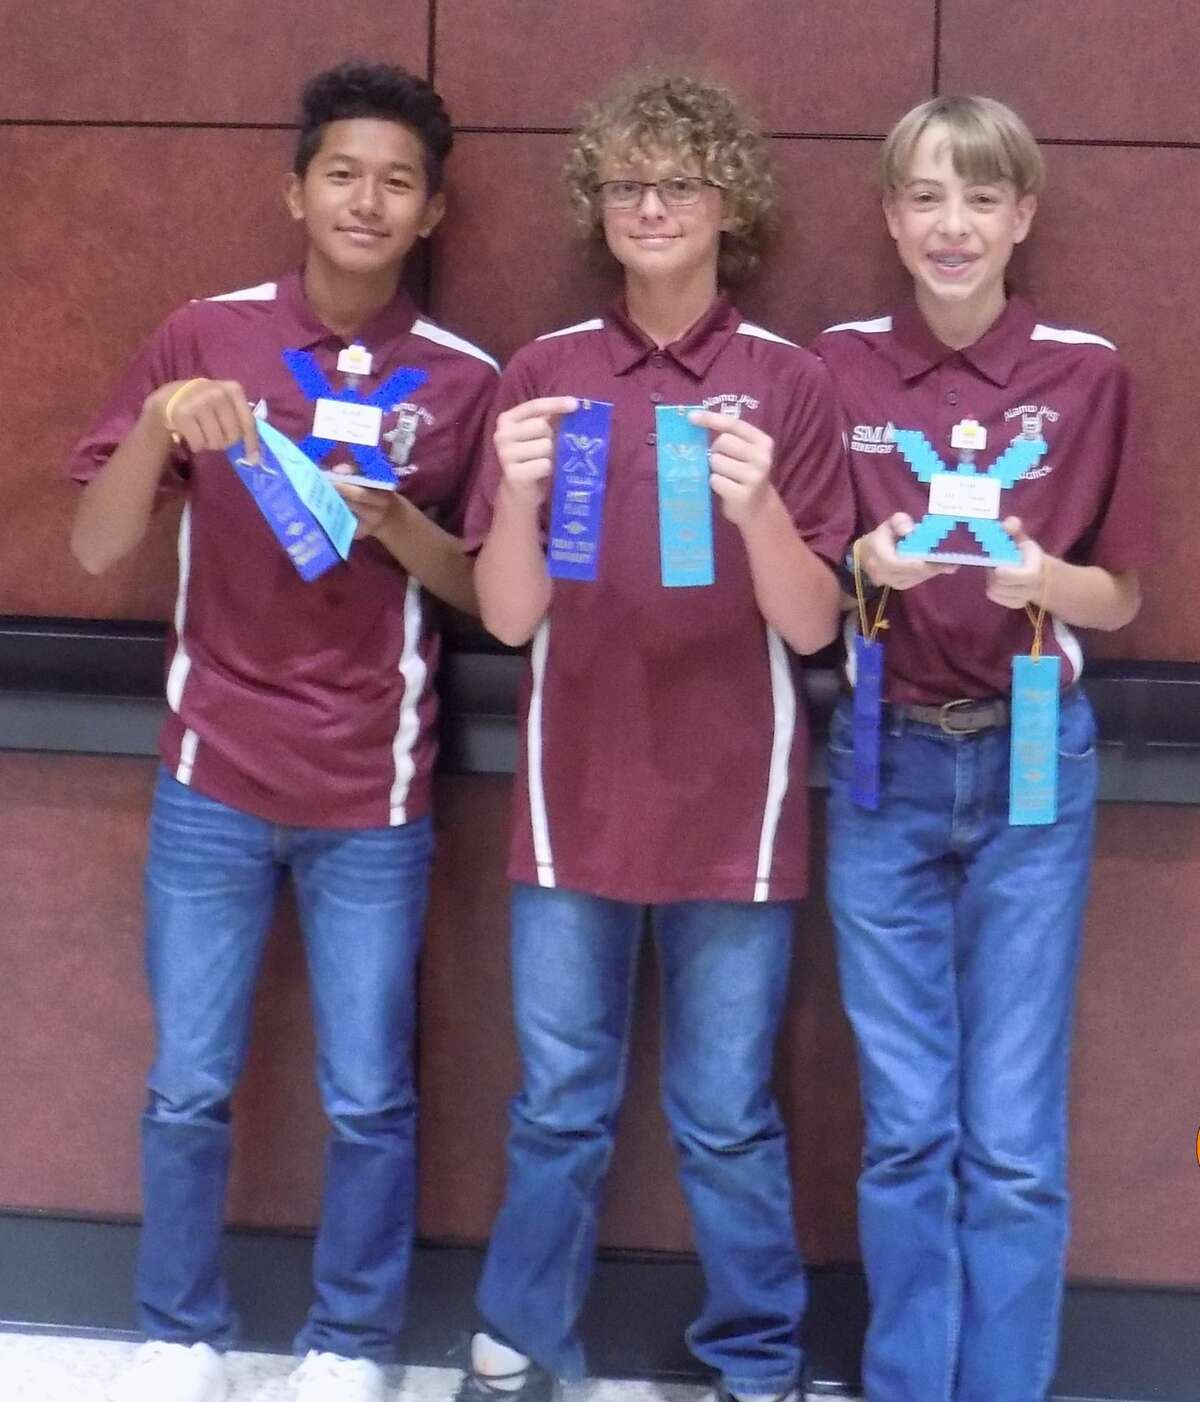 Eight robotics teams from Alamo Junior High School competed at the GEAR contest championship April 29 in Lubbock. The Ballers won first place and the Pinnacle Award. Members are Joshua Lian, from left, Maison Greer and Ryan Parmer.